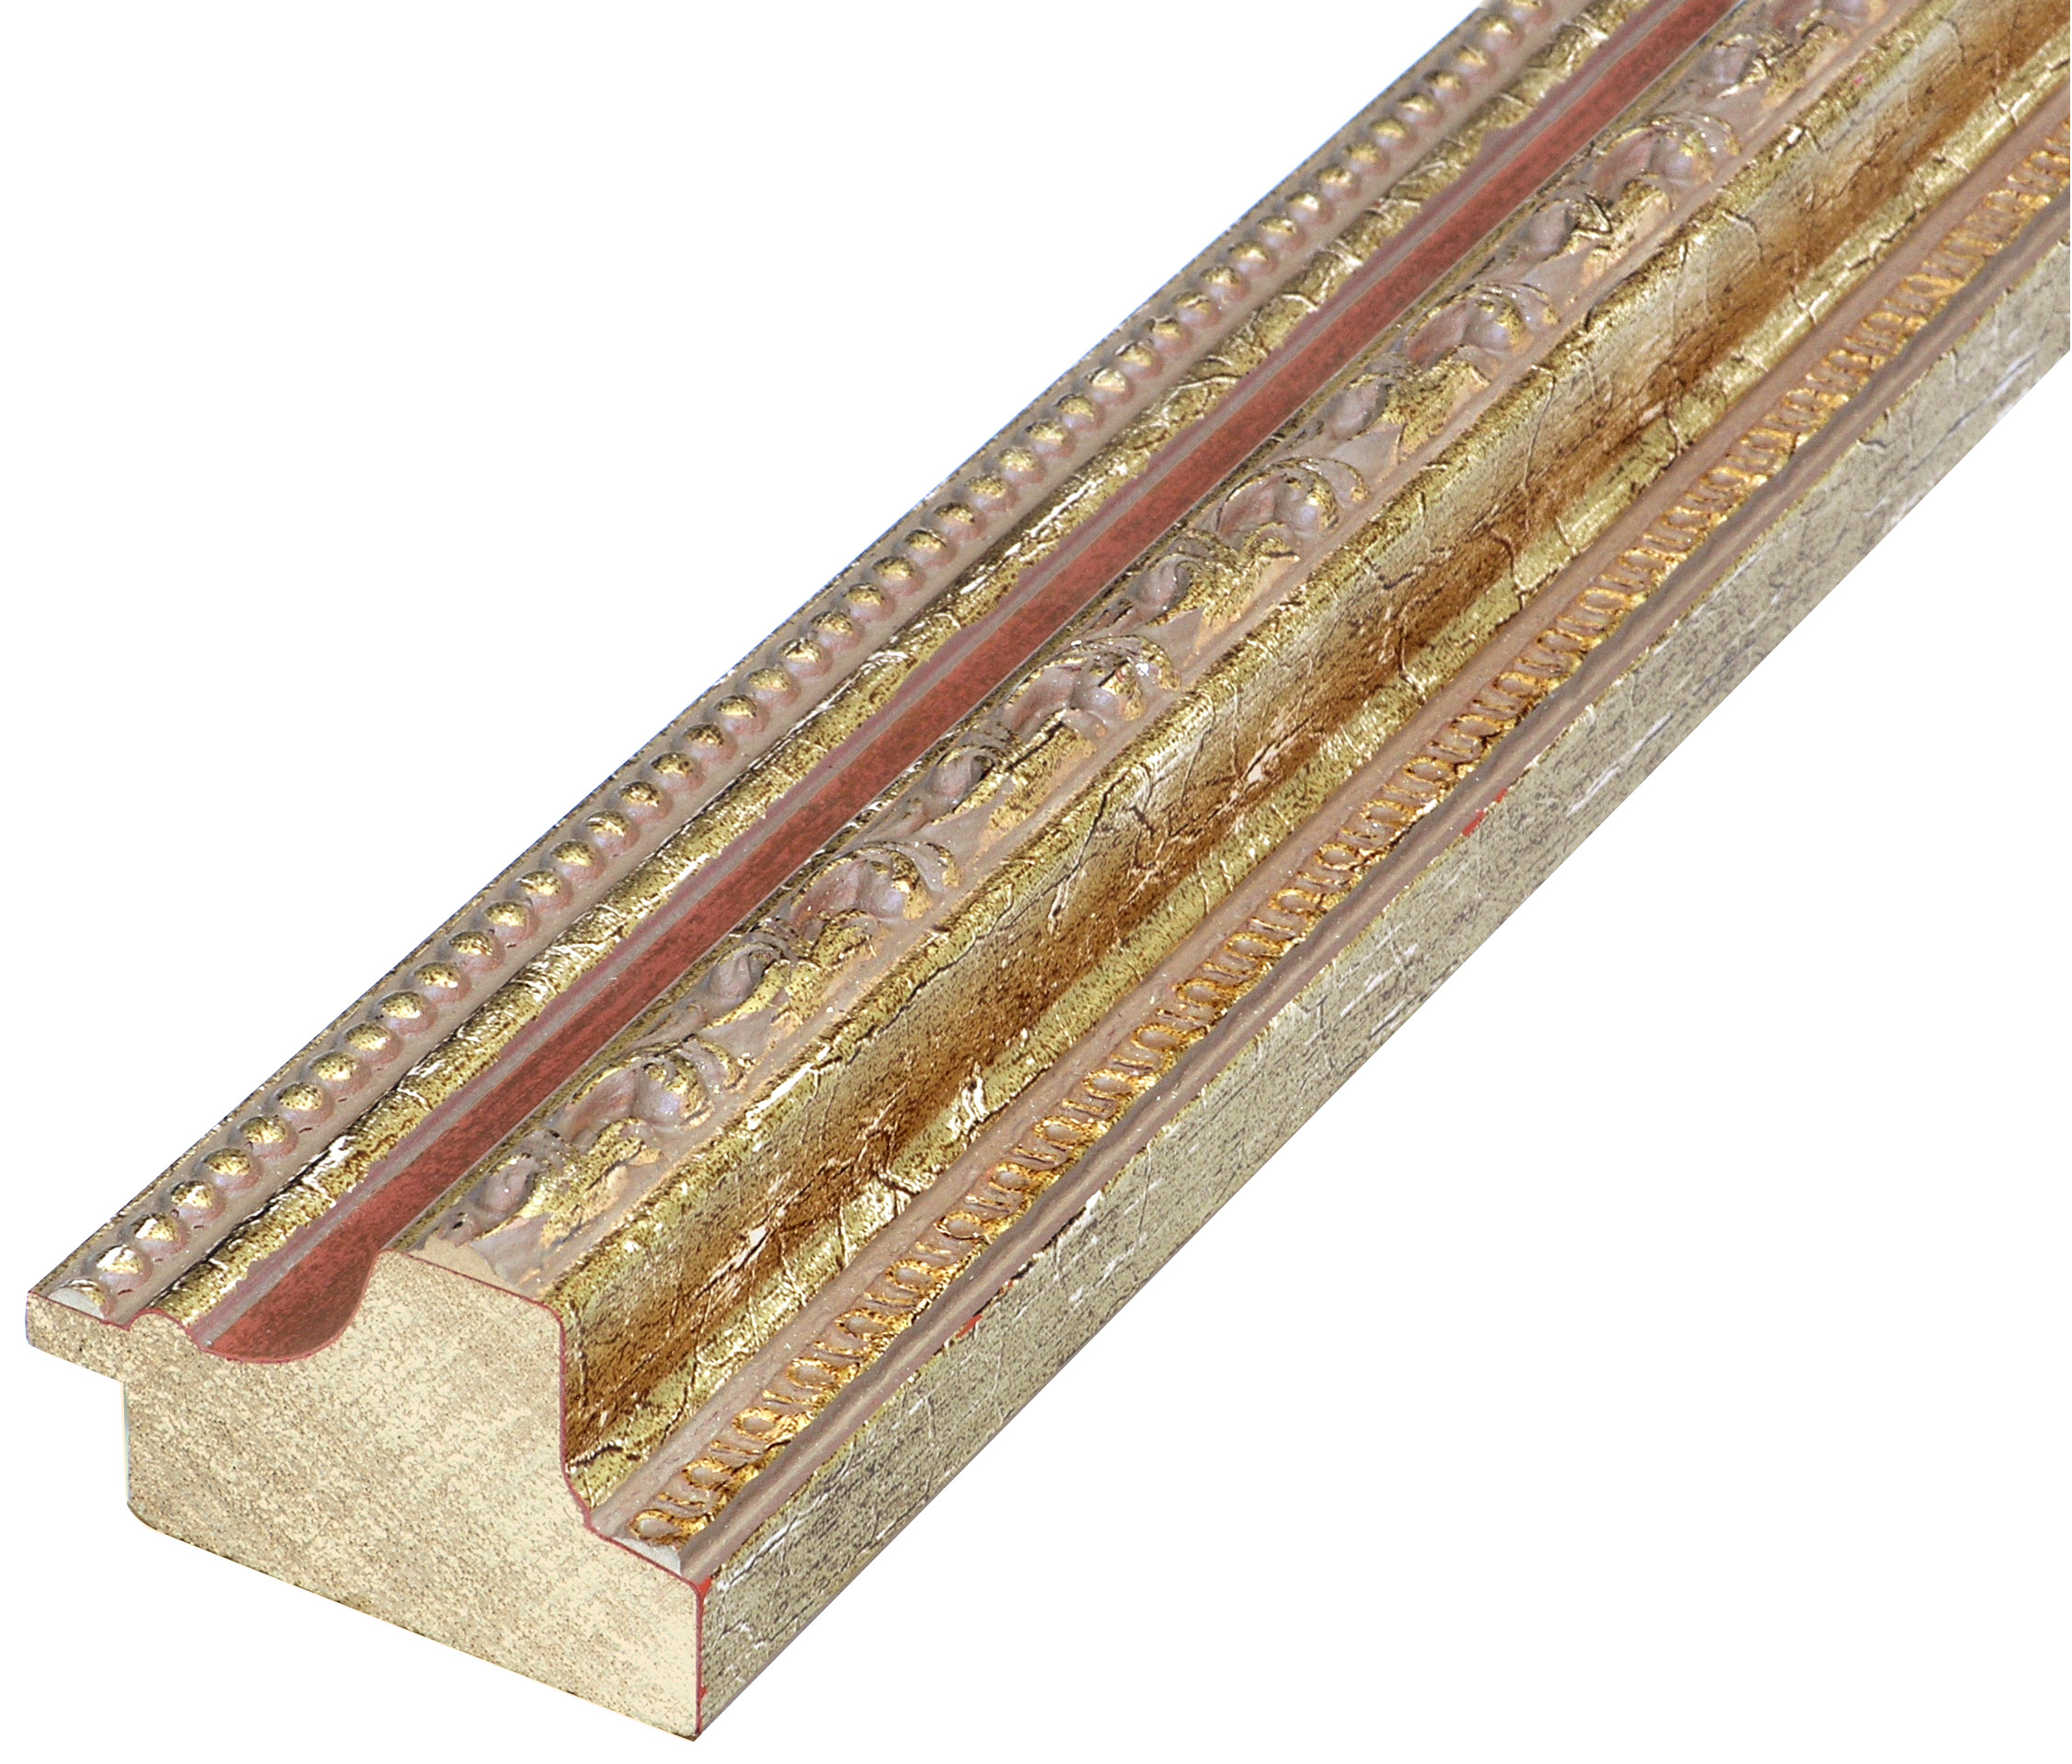 Moulding finger-jointed pine - width 53mm height 35 - gold, red band